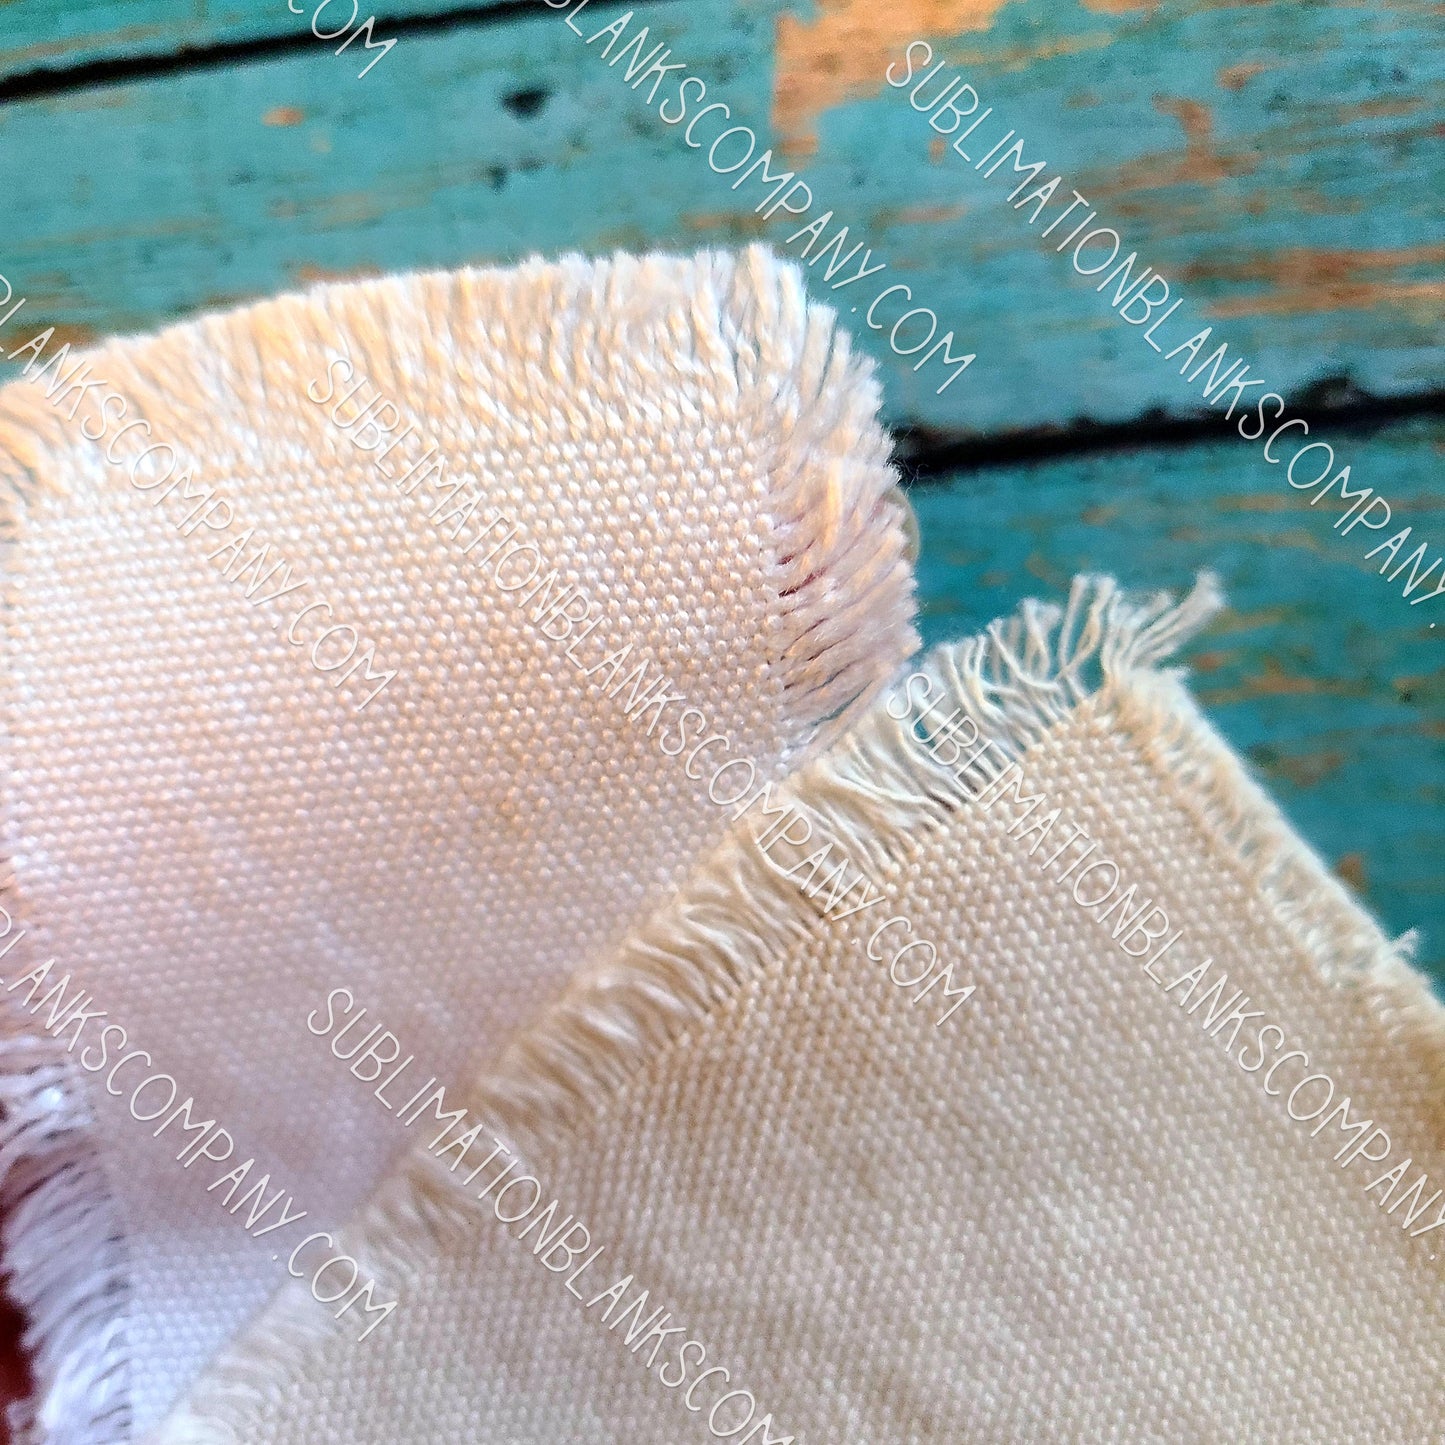 Distressed Burlap Rectangle Hat Patch Sublimation Blank with Glue Paper. Raggy